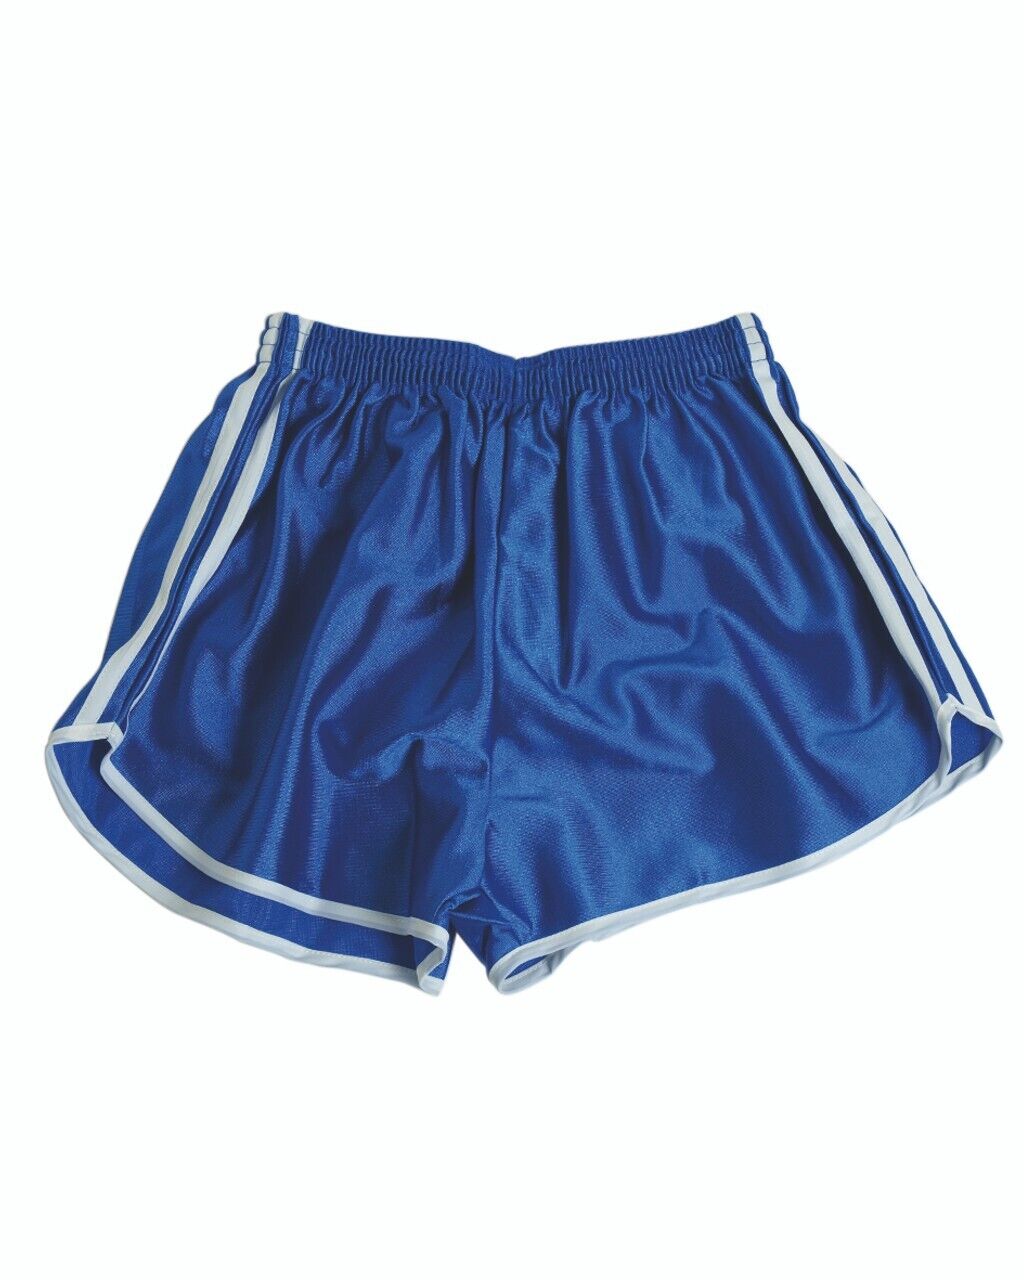 Blue French Army Sports Shorts White Summer Military Fitness Gym Running Sz Med